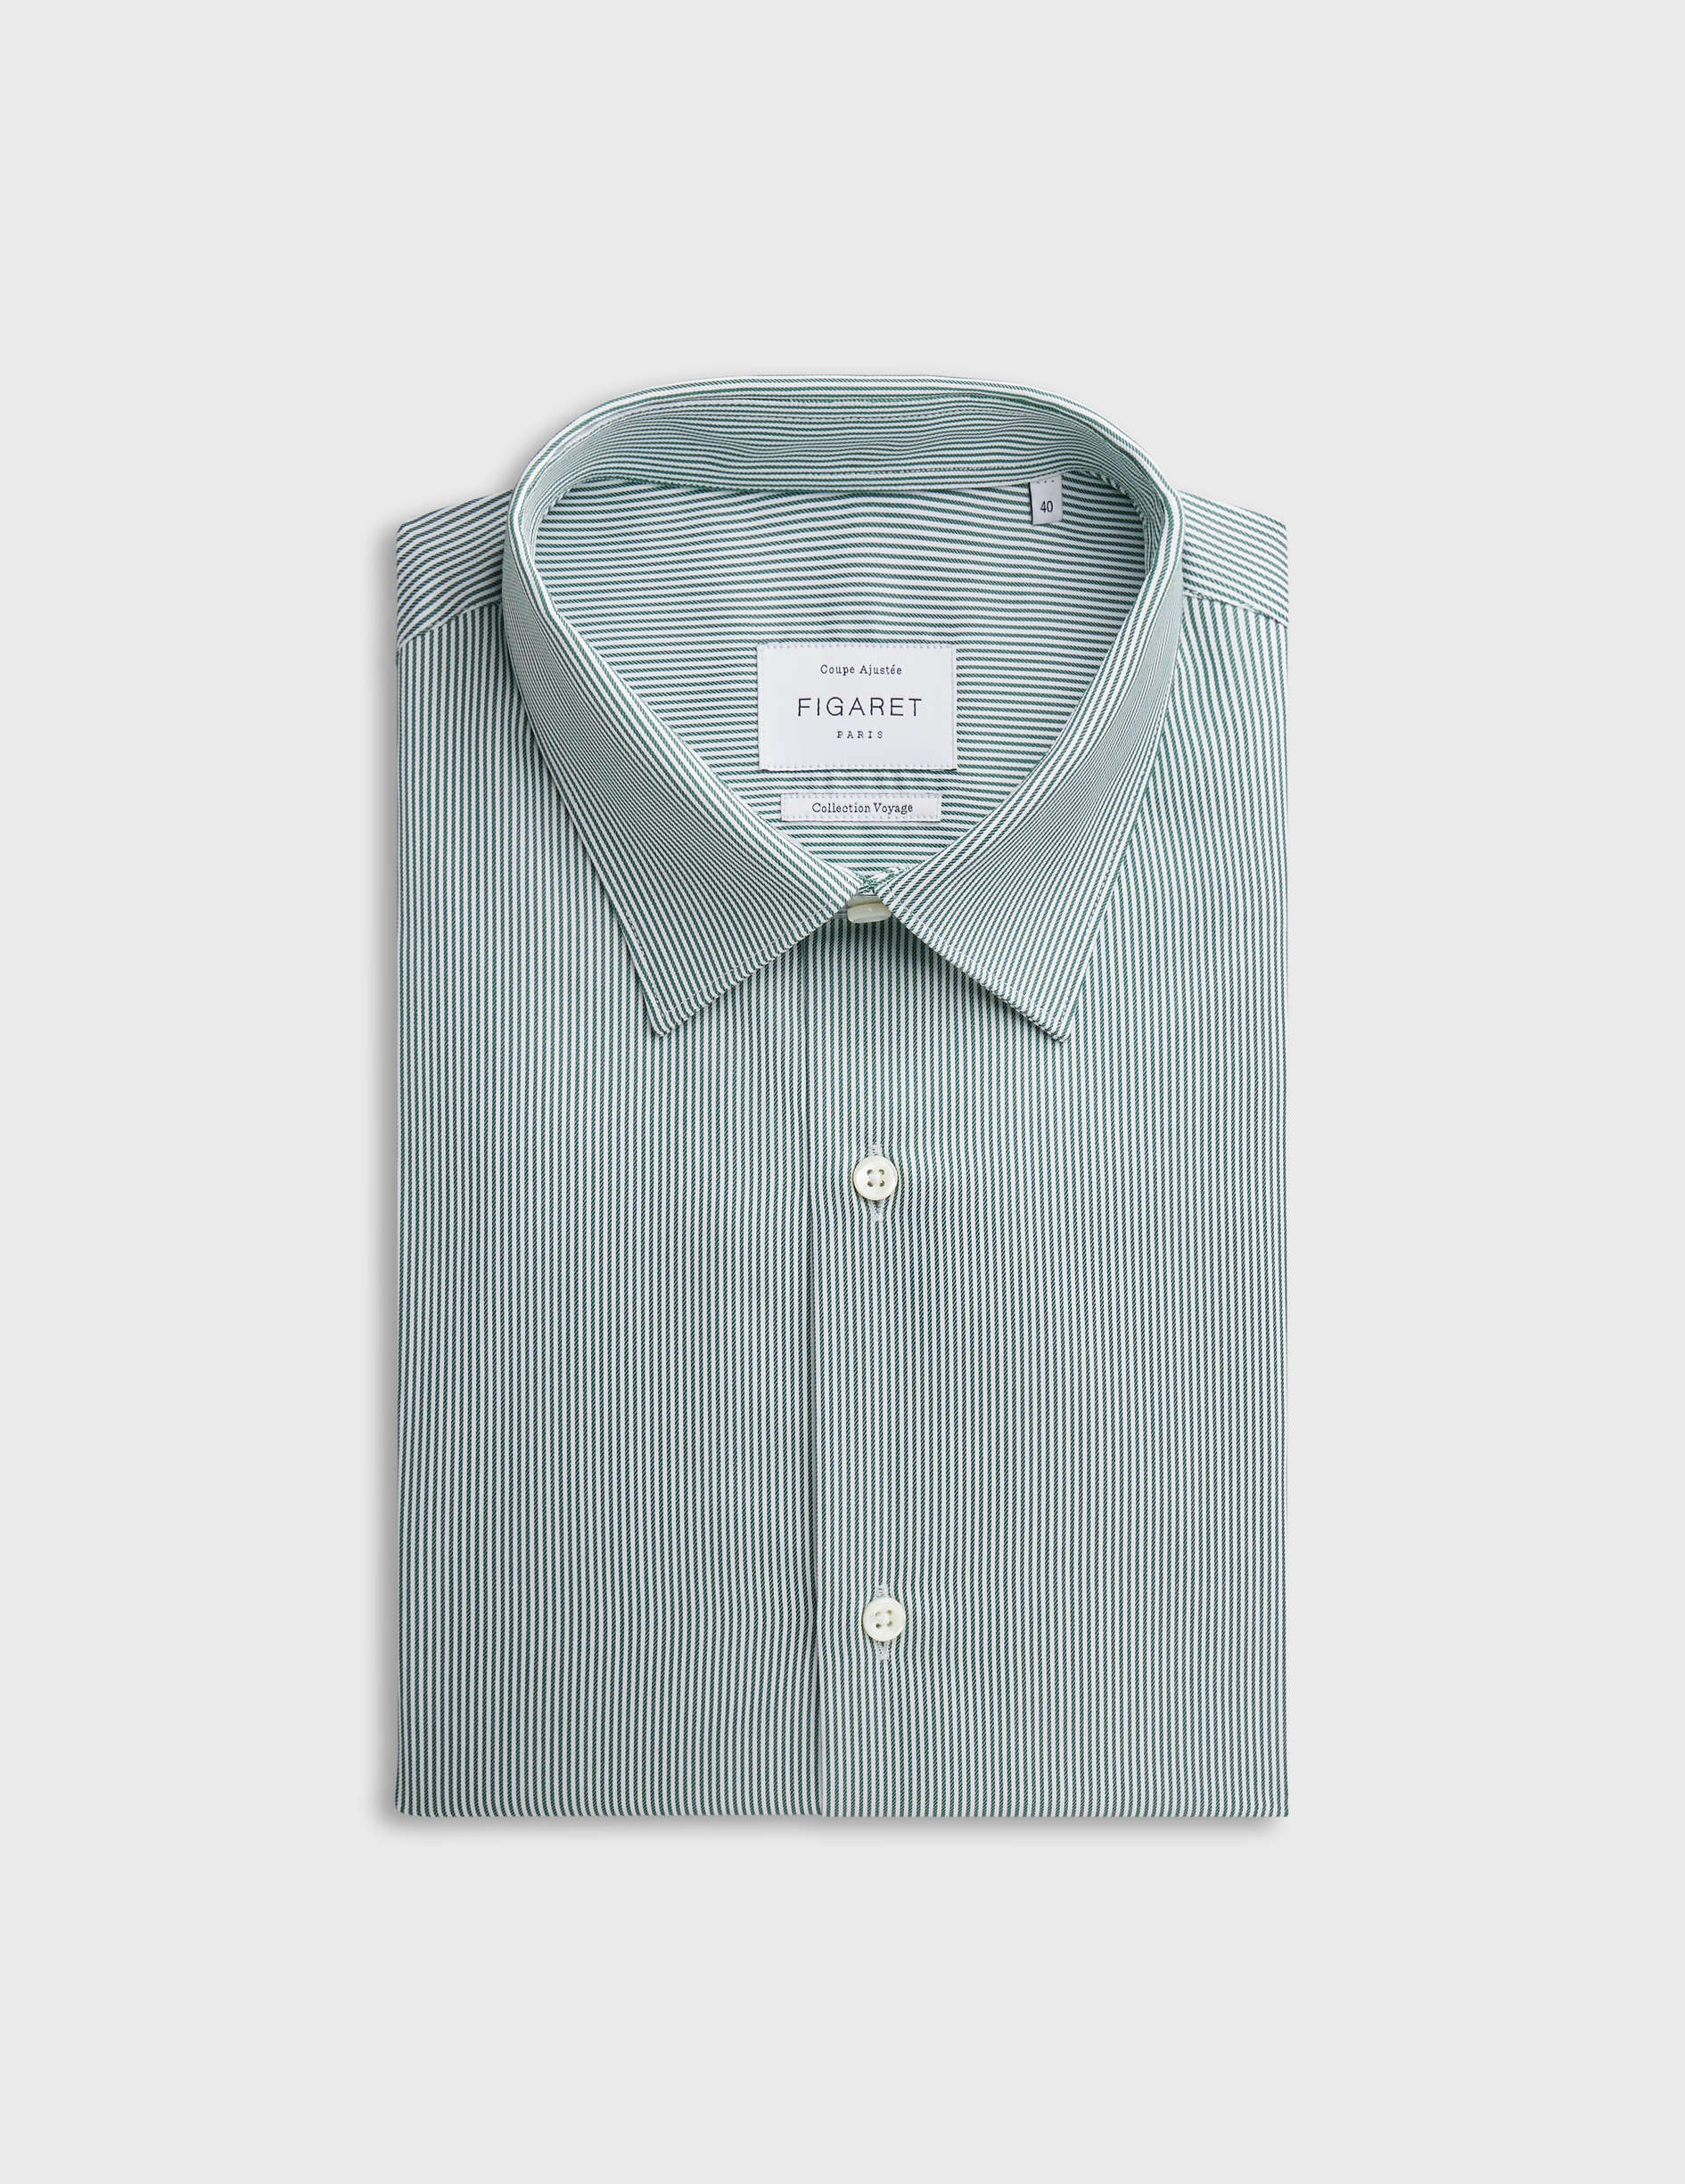 Fitted green striped wrinkle-free shirt - Twill - Figaret Collar